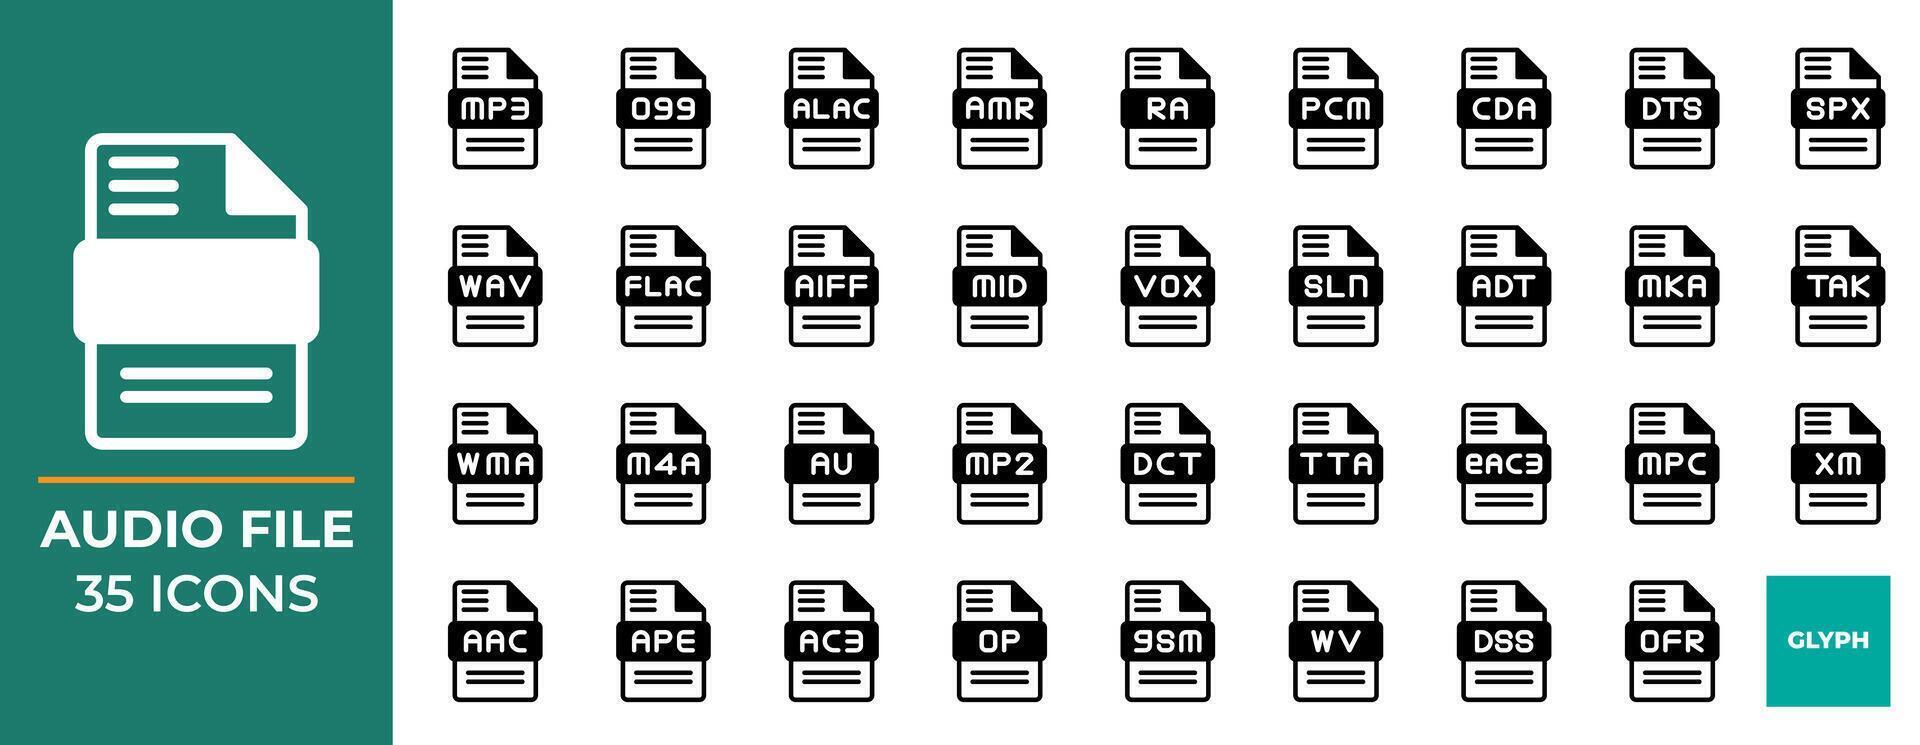 Audio file type icon set, vector solid icons collection, can be used for website interfaces, mobile applications and software.